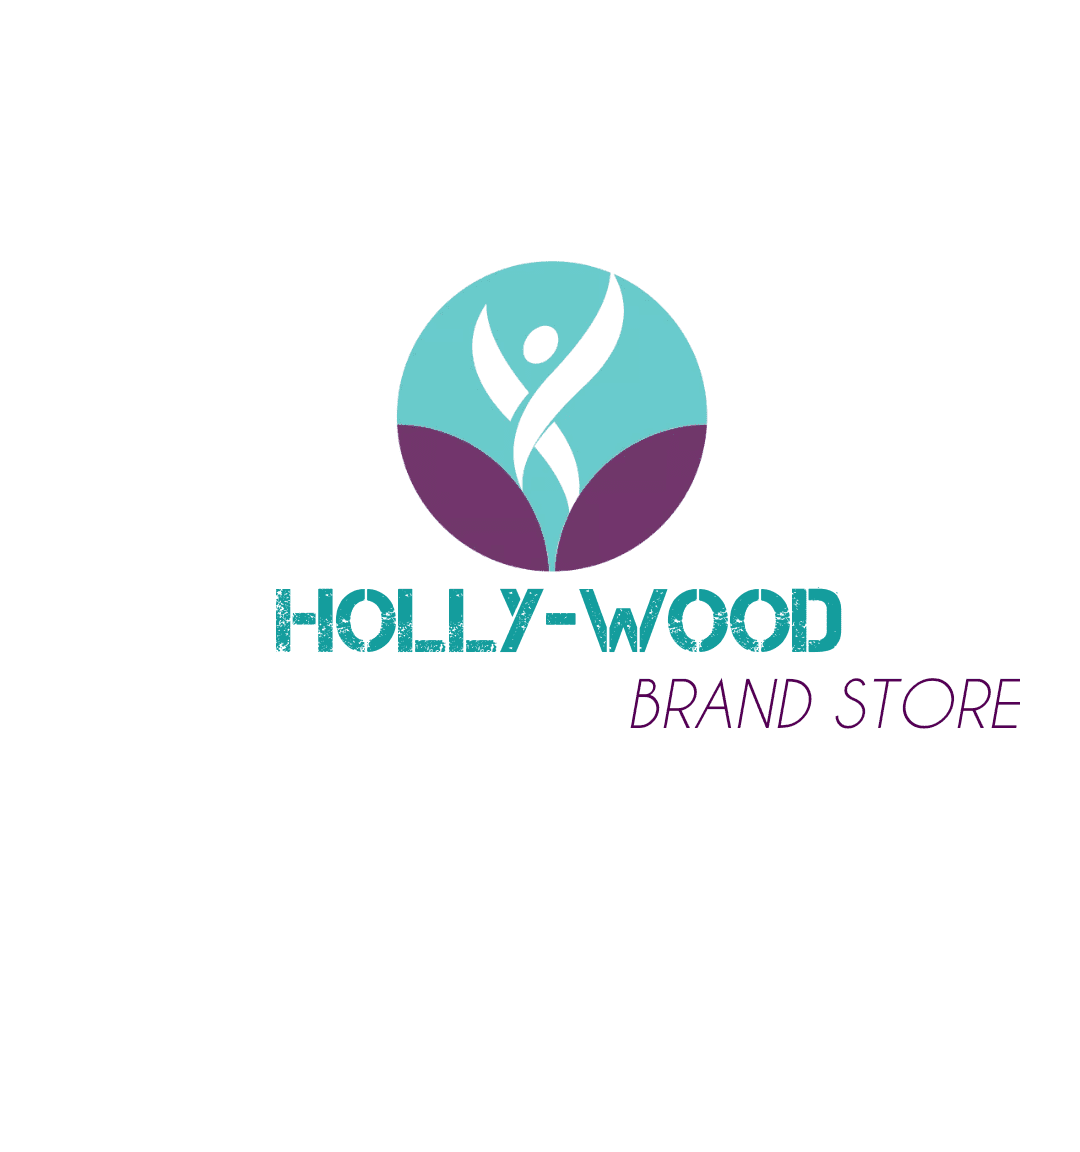 Holly-Wood Brand Store